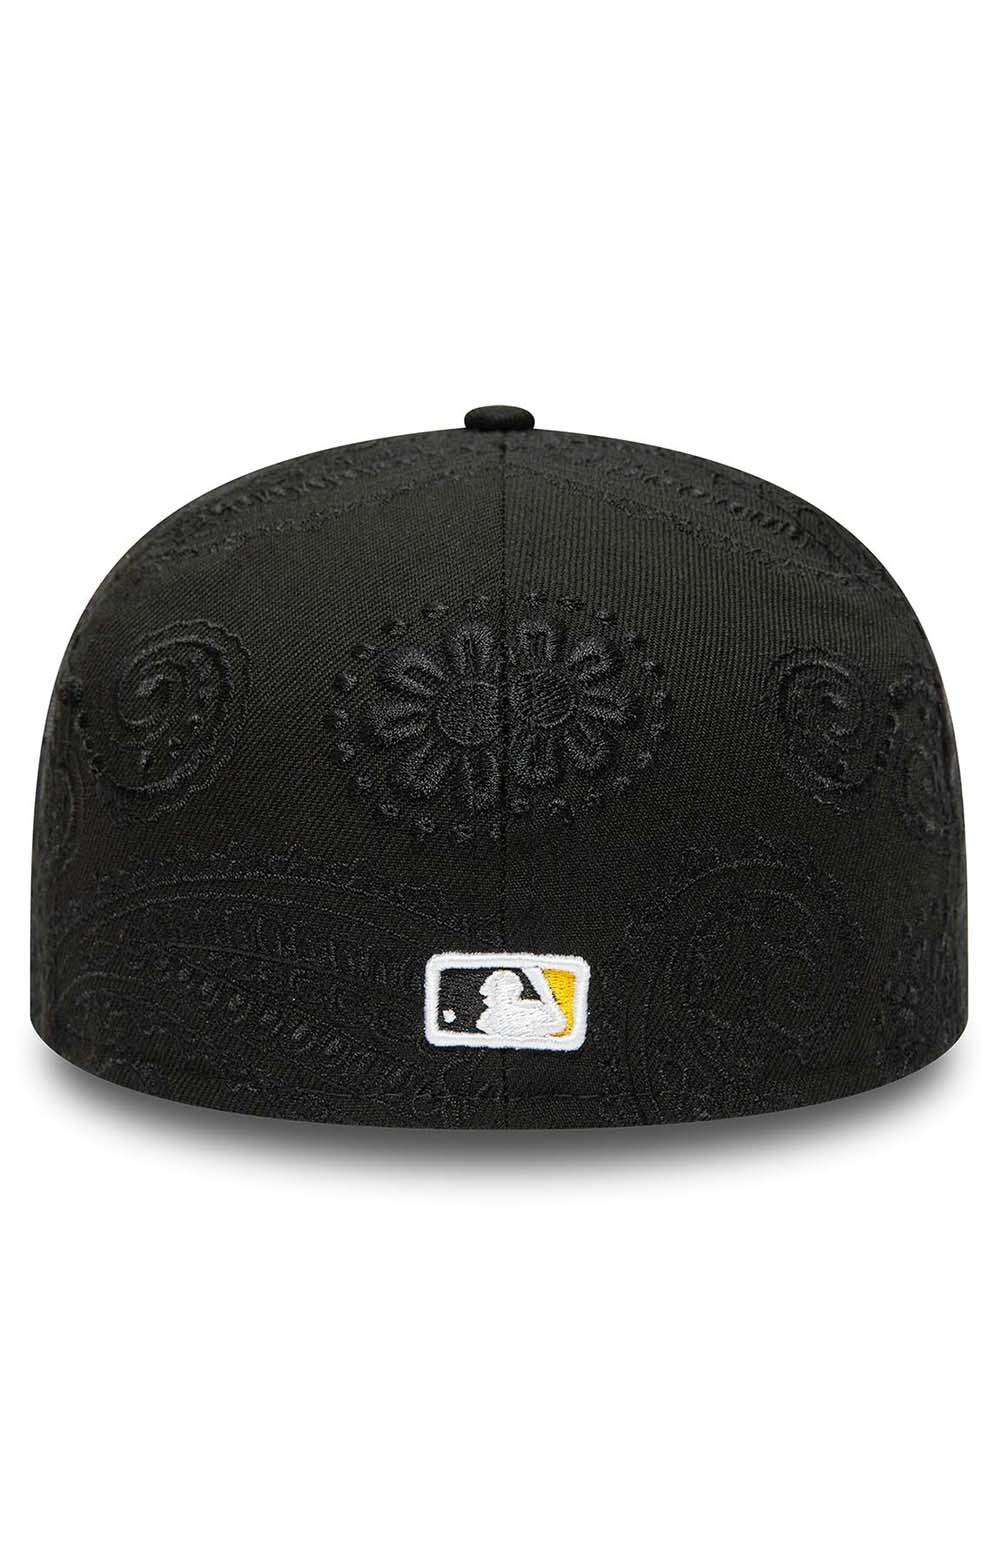 Pittsburgh Pirates Swirl 59FIFTY Fitted Hat